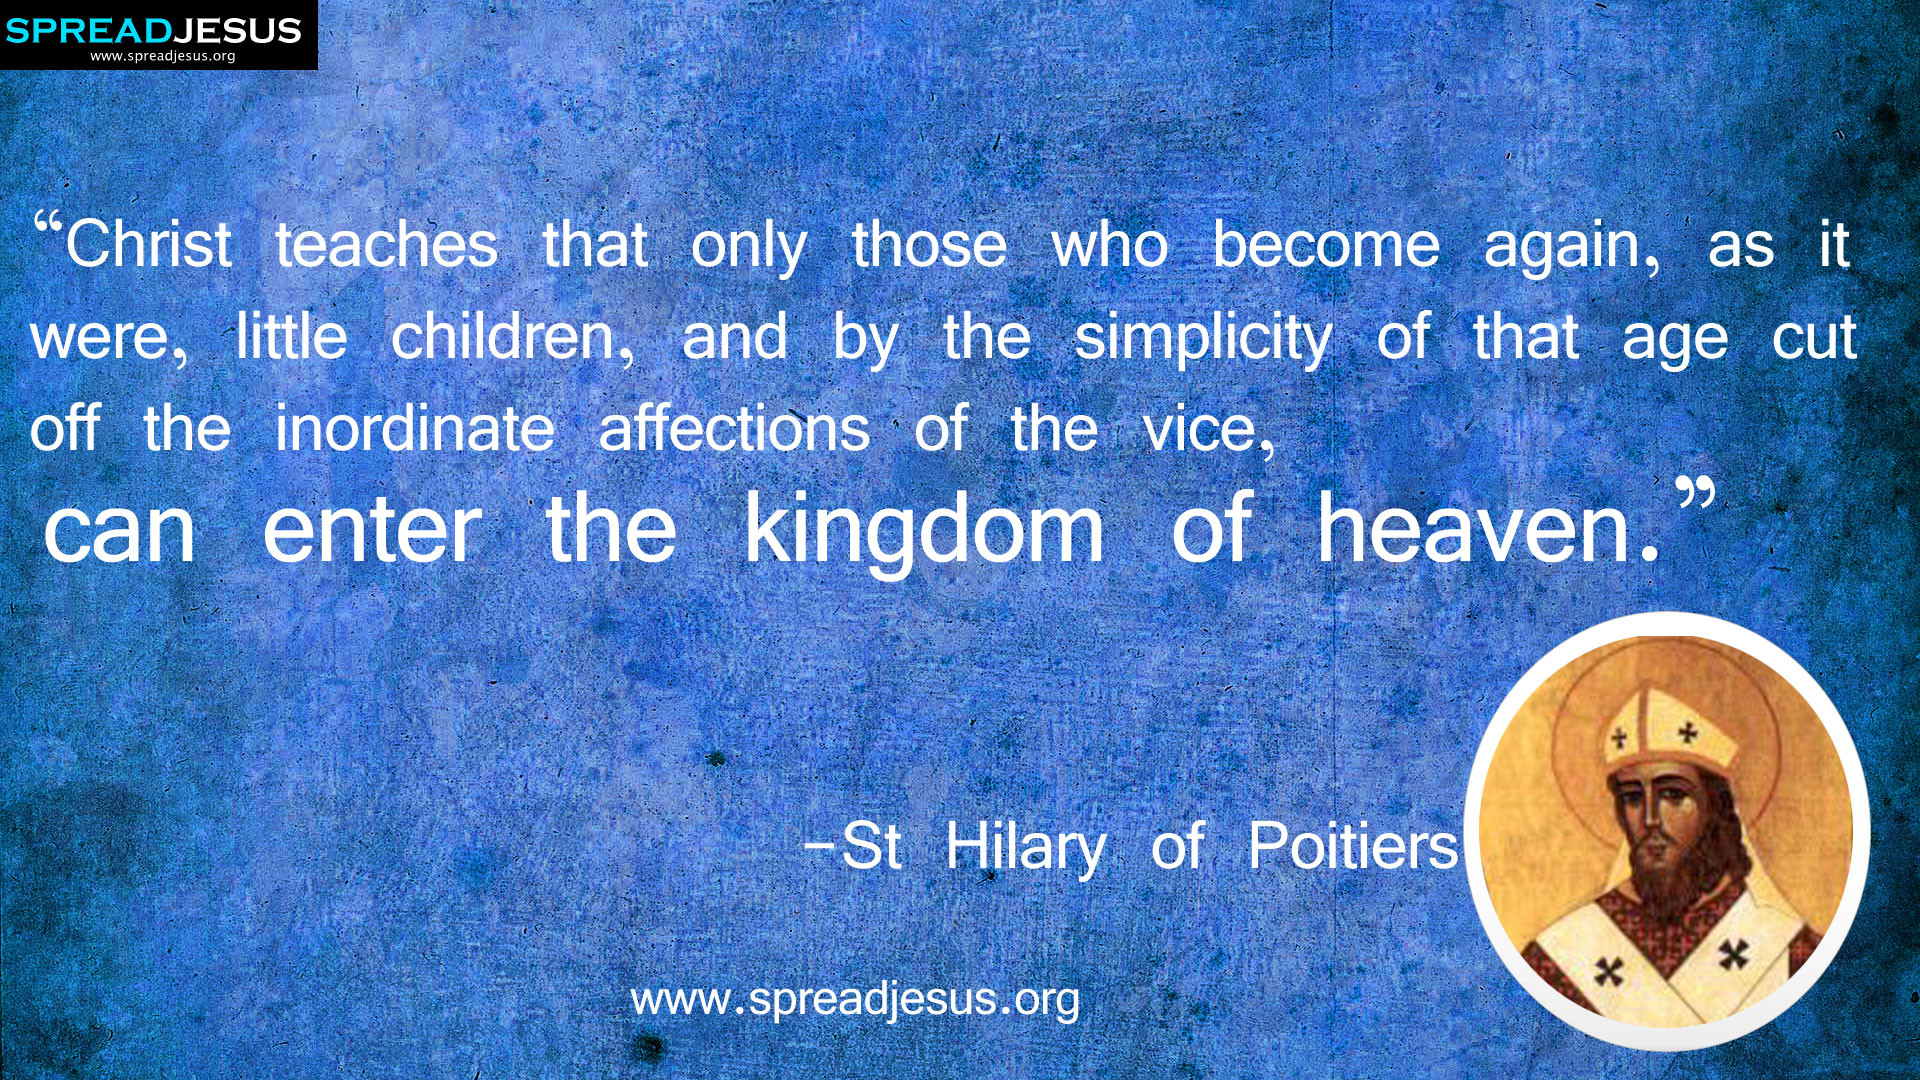 1920x1080 St Hilary of Poitiers:St Hilary of Poitiers QUOTES HD-WALLPAPERS DOWNLOAD: CATHOLIC